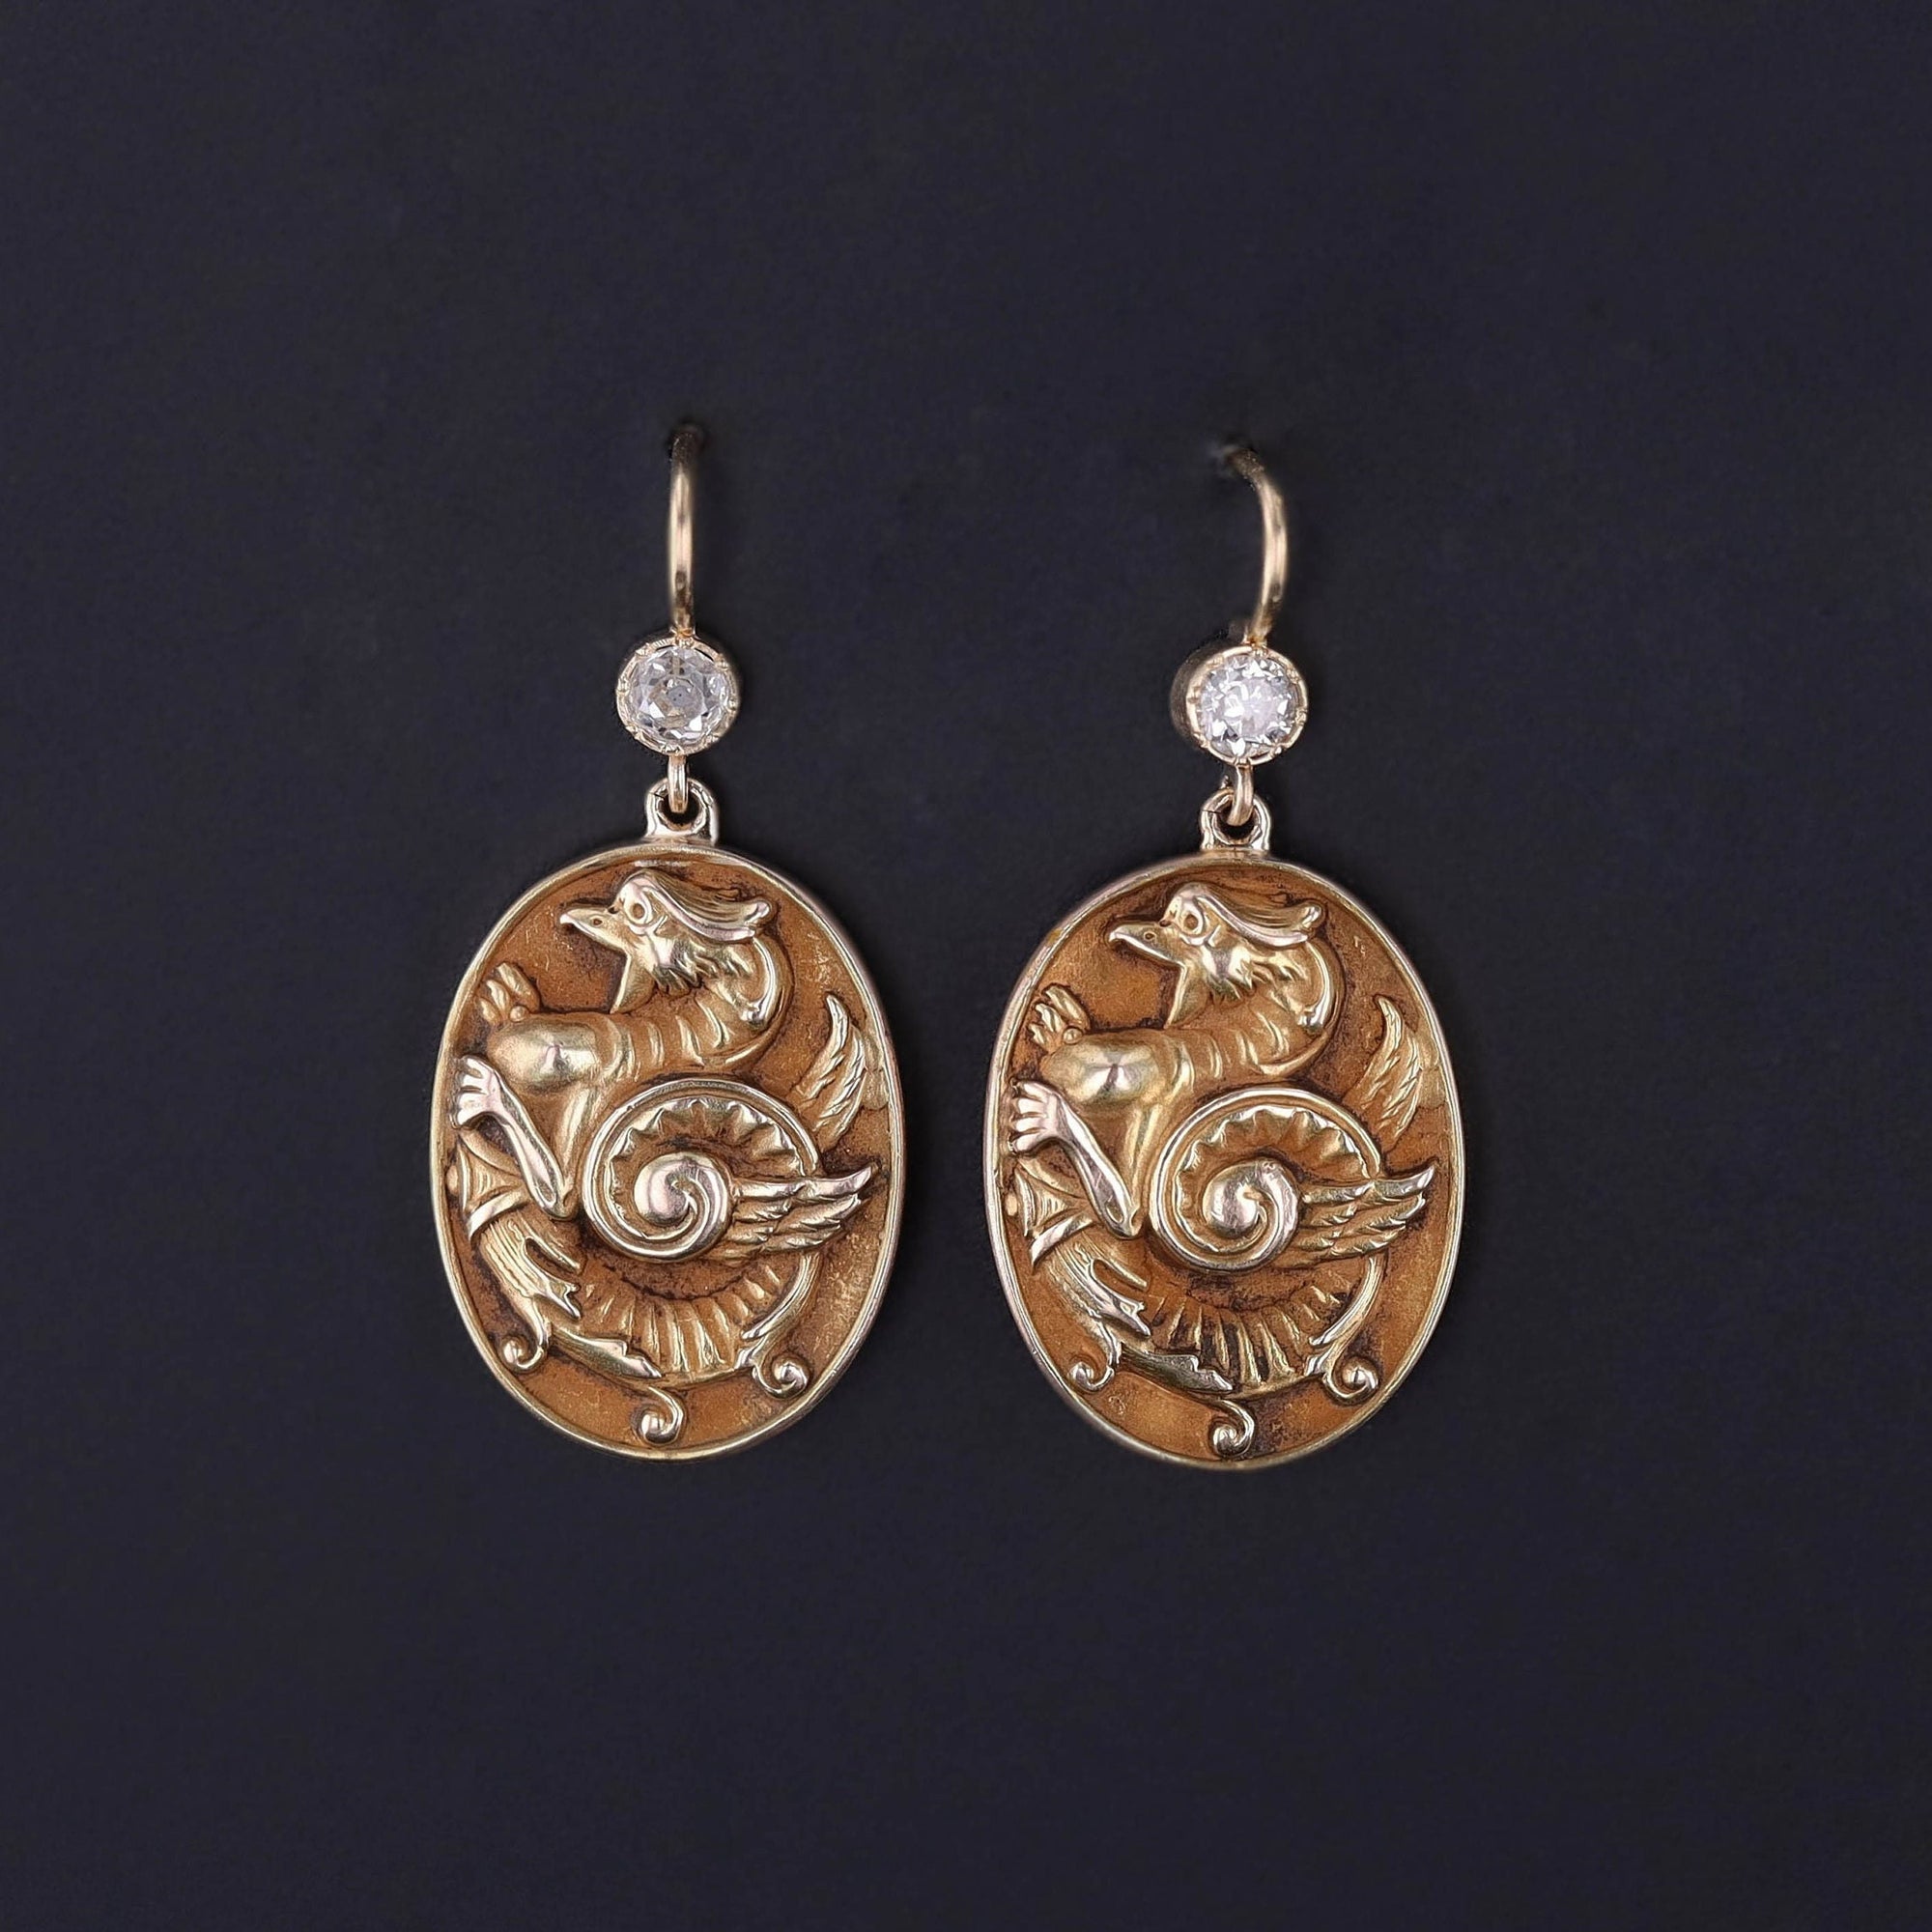 Antique Dragon Earrings of 12ct Gold